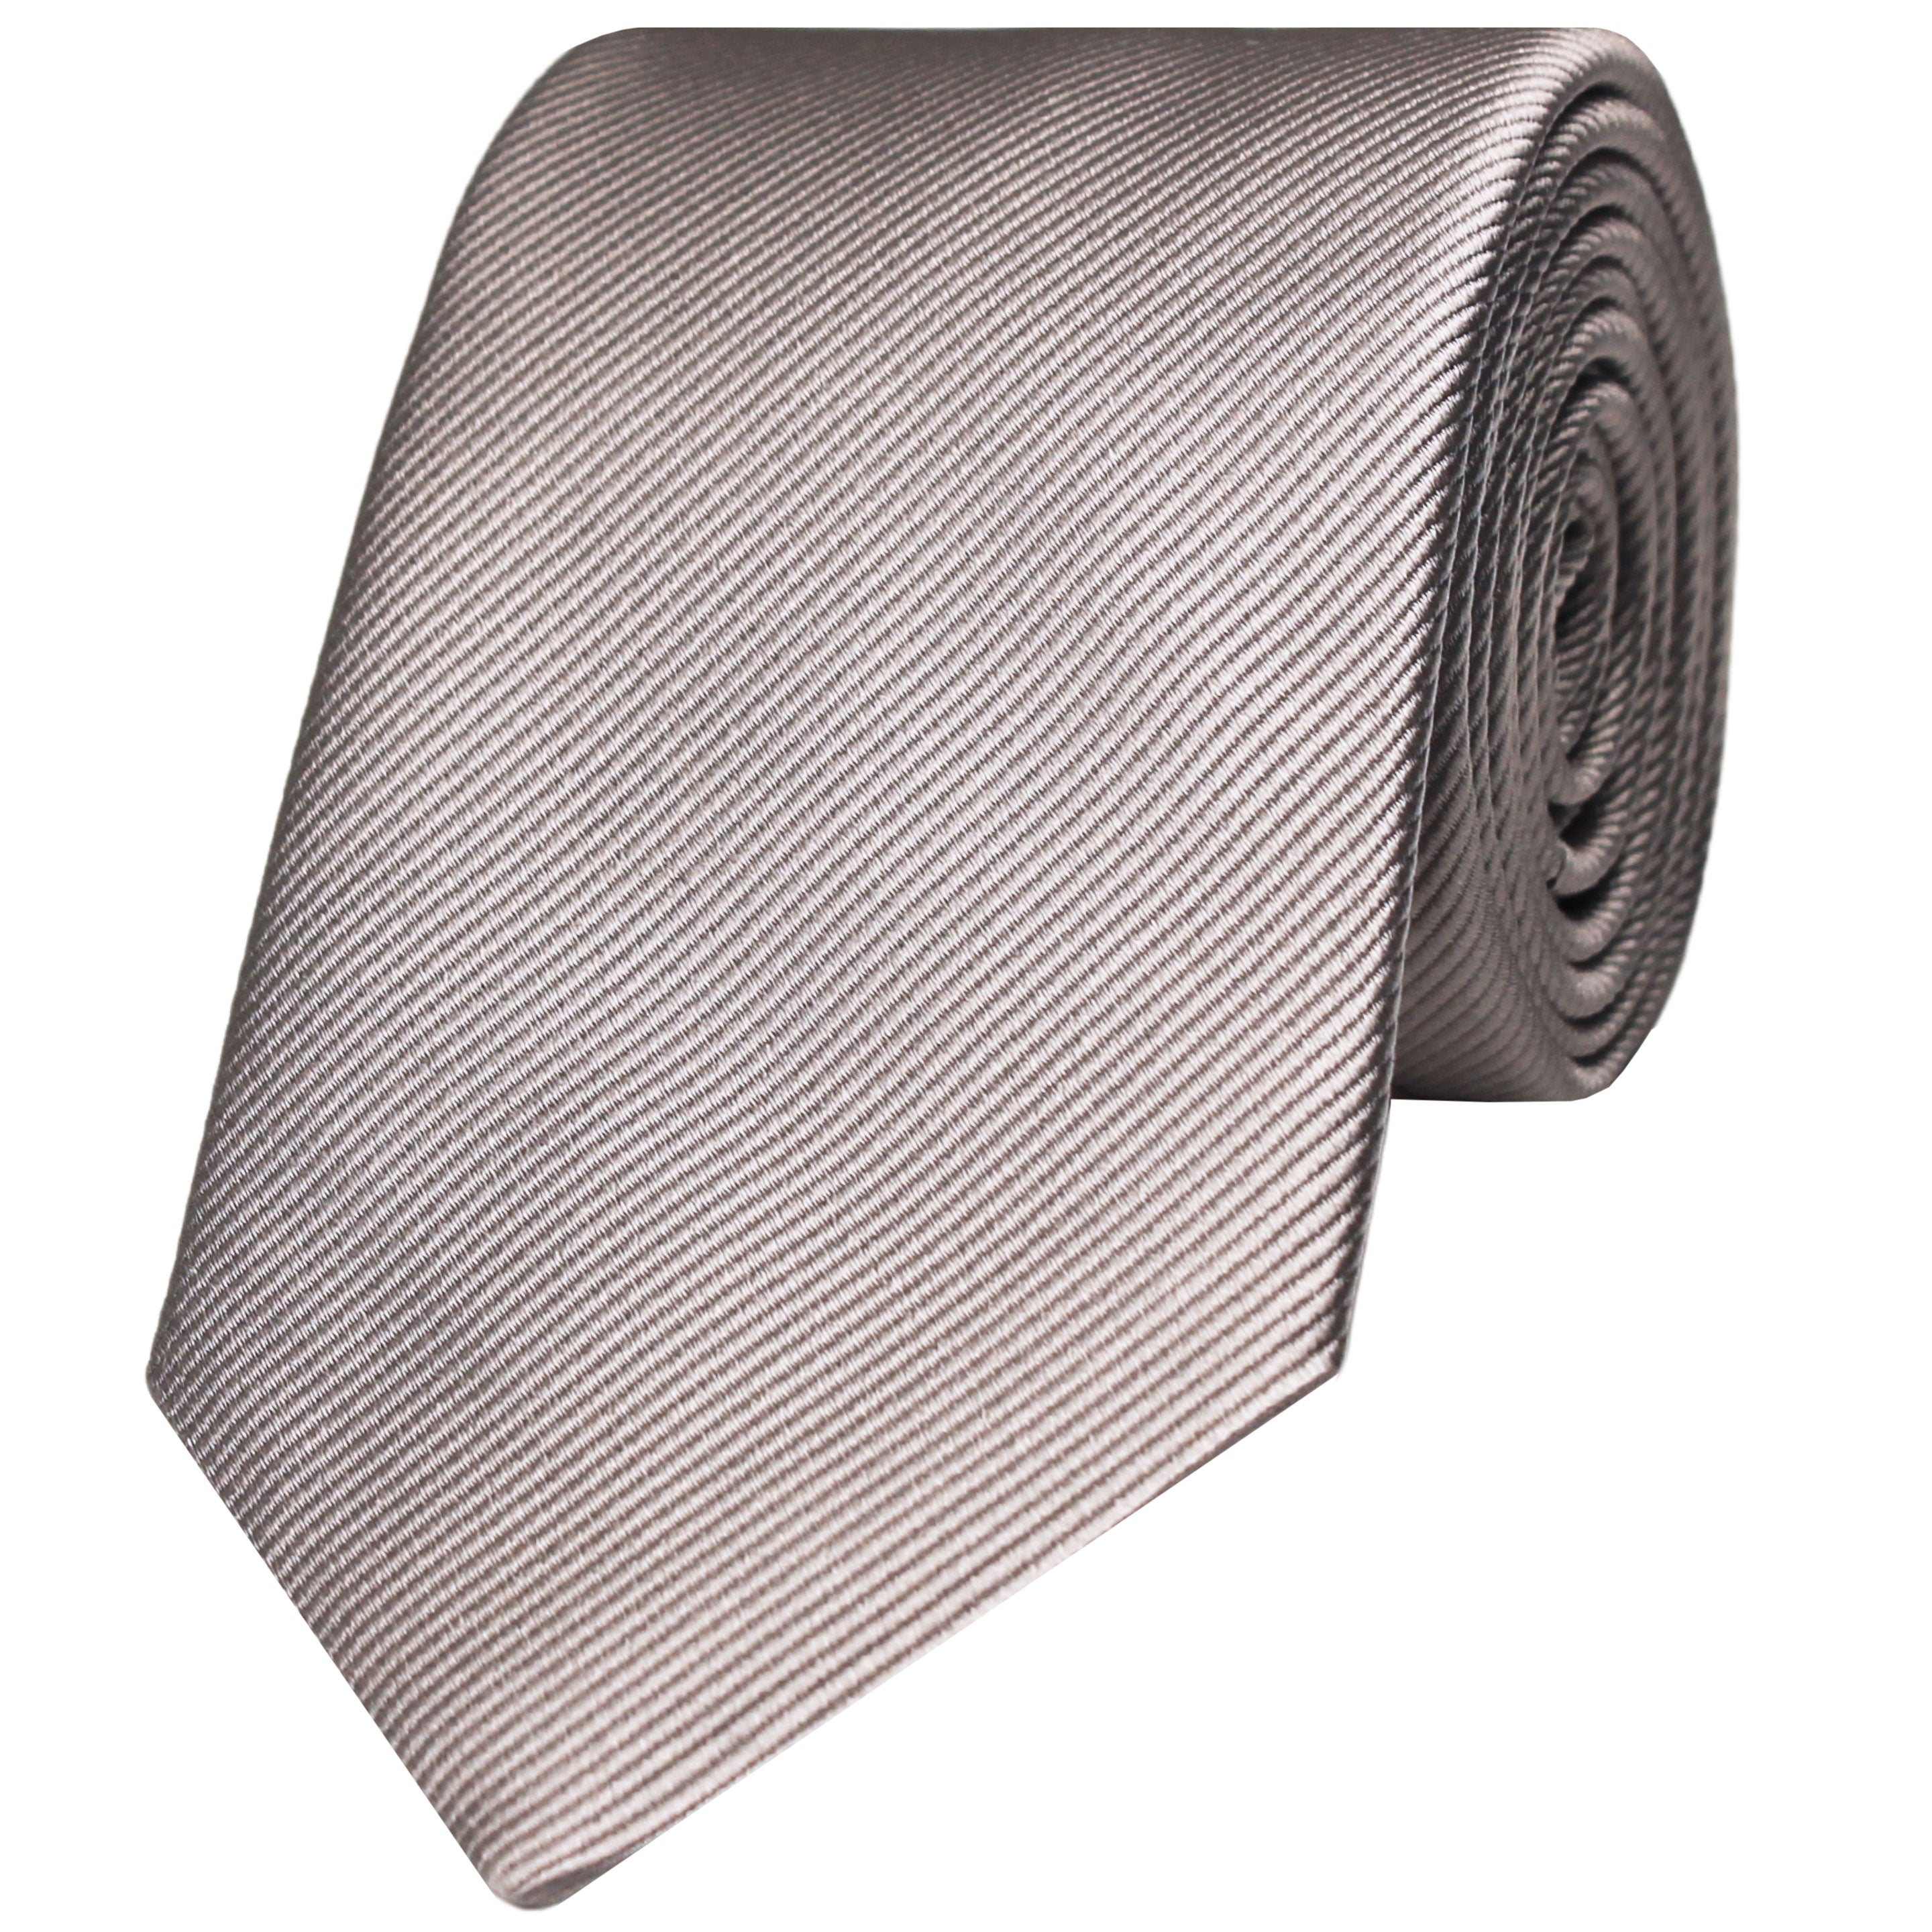 Gold Woven Twill Solid Silk Tie